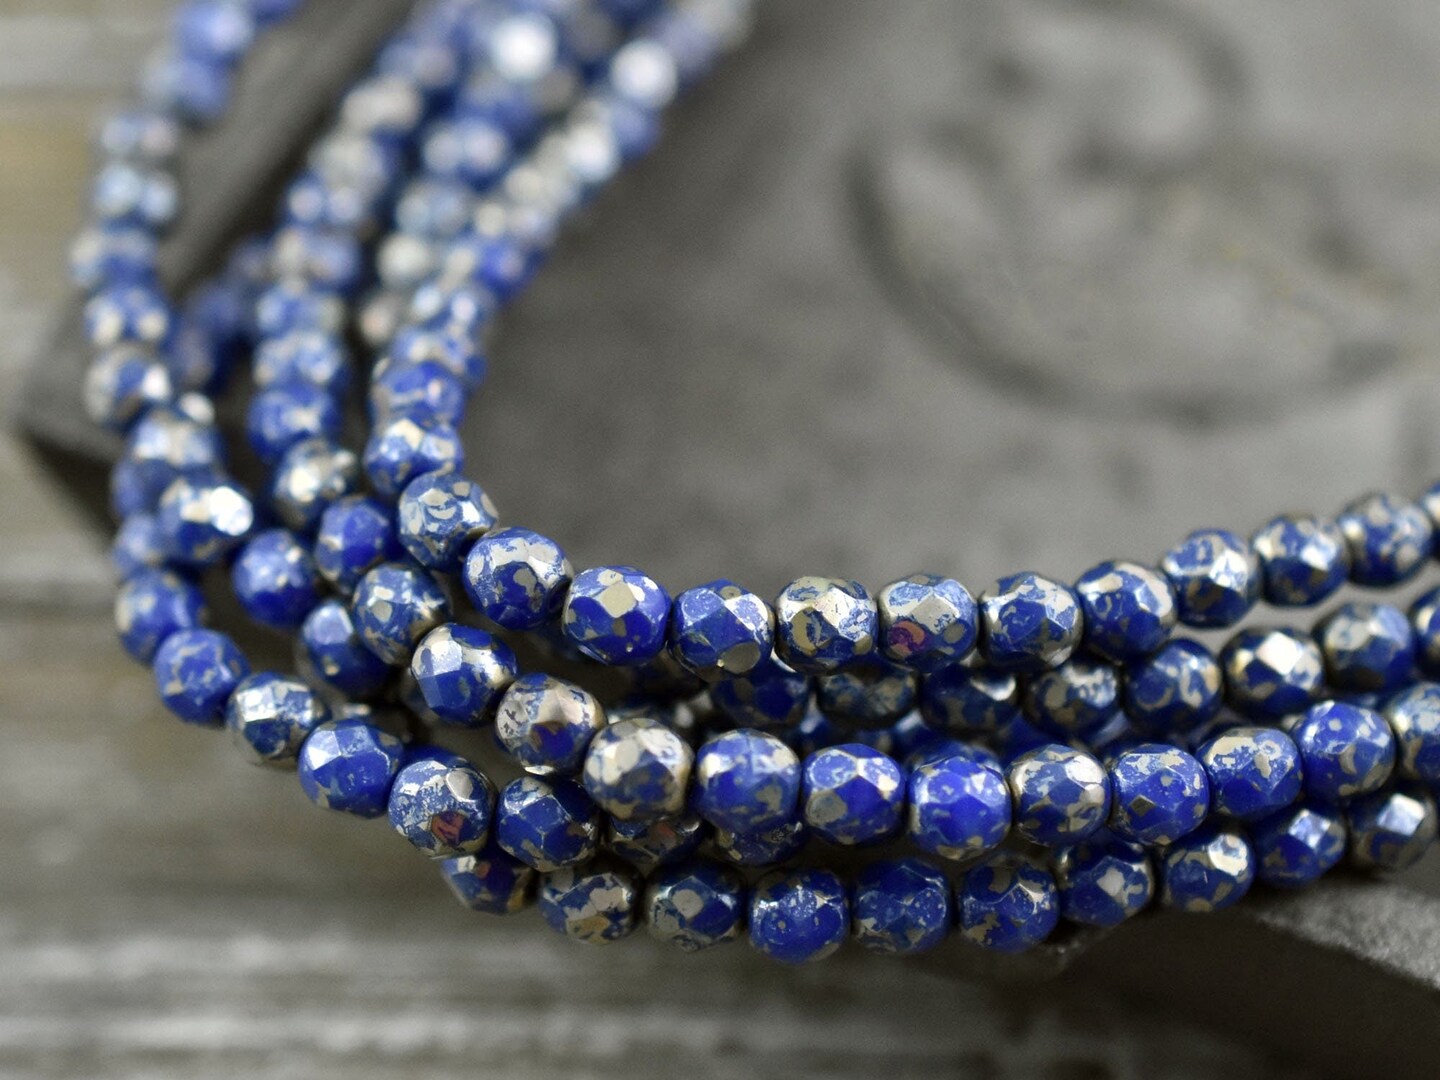 *50* 4mm Opaque Cobalt Silver Picasso Fire Polished Round Beads